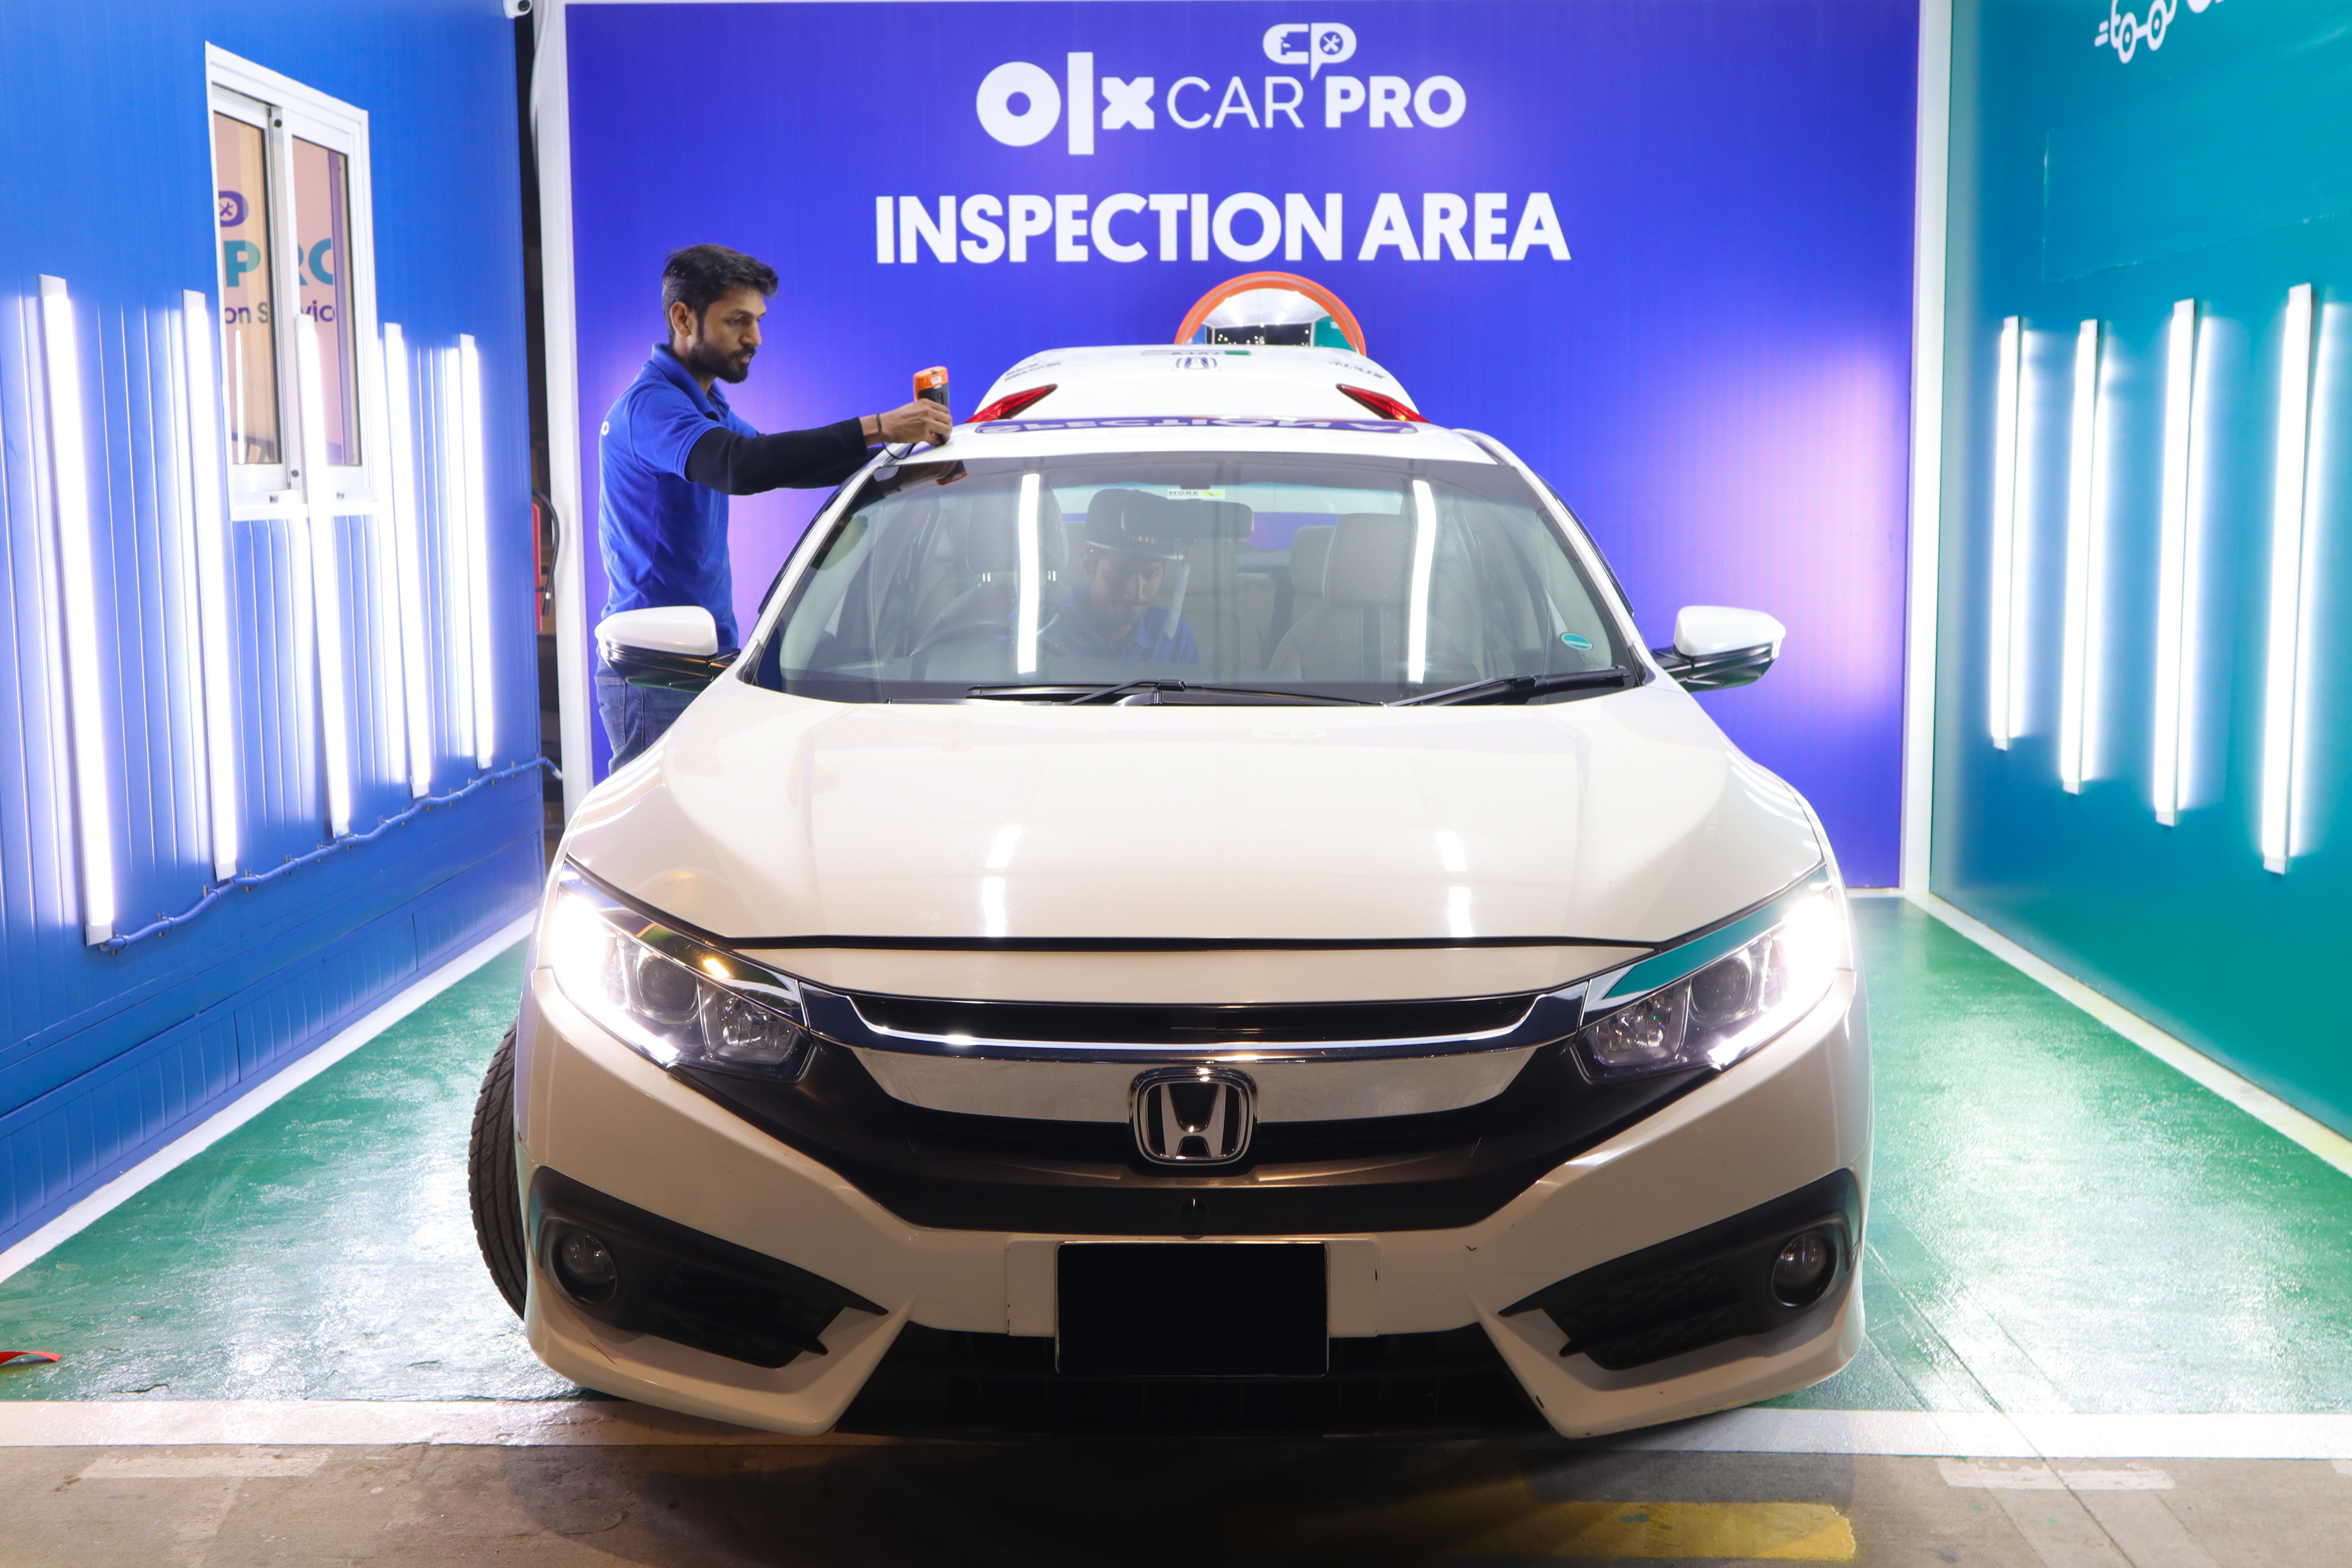 OLX INAUGURATES ITS FIRST CUSTOMER FACILITATION CENTER ALONG WITH CARFIRST AT PACKAGES MALL IN LAHORE